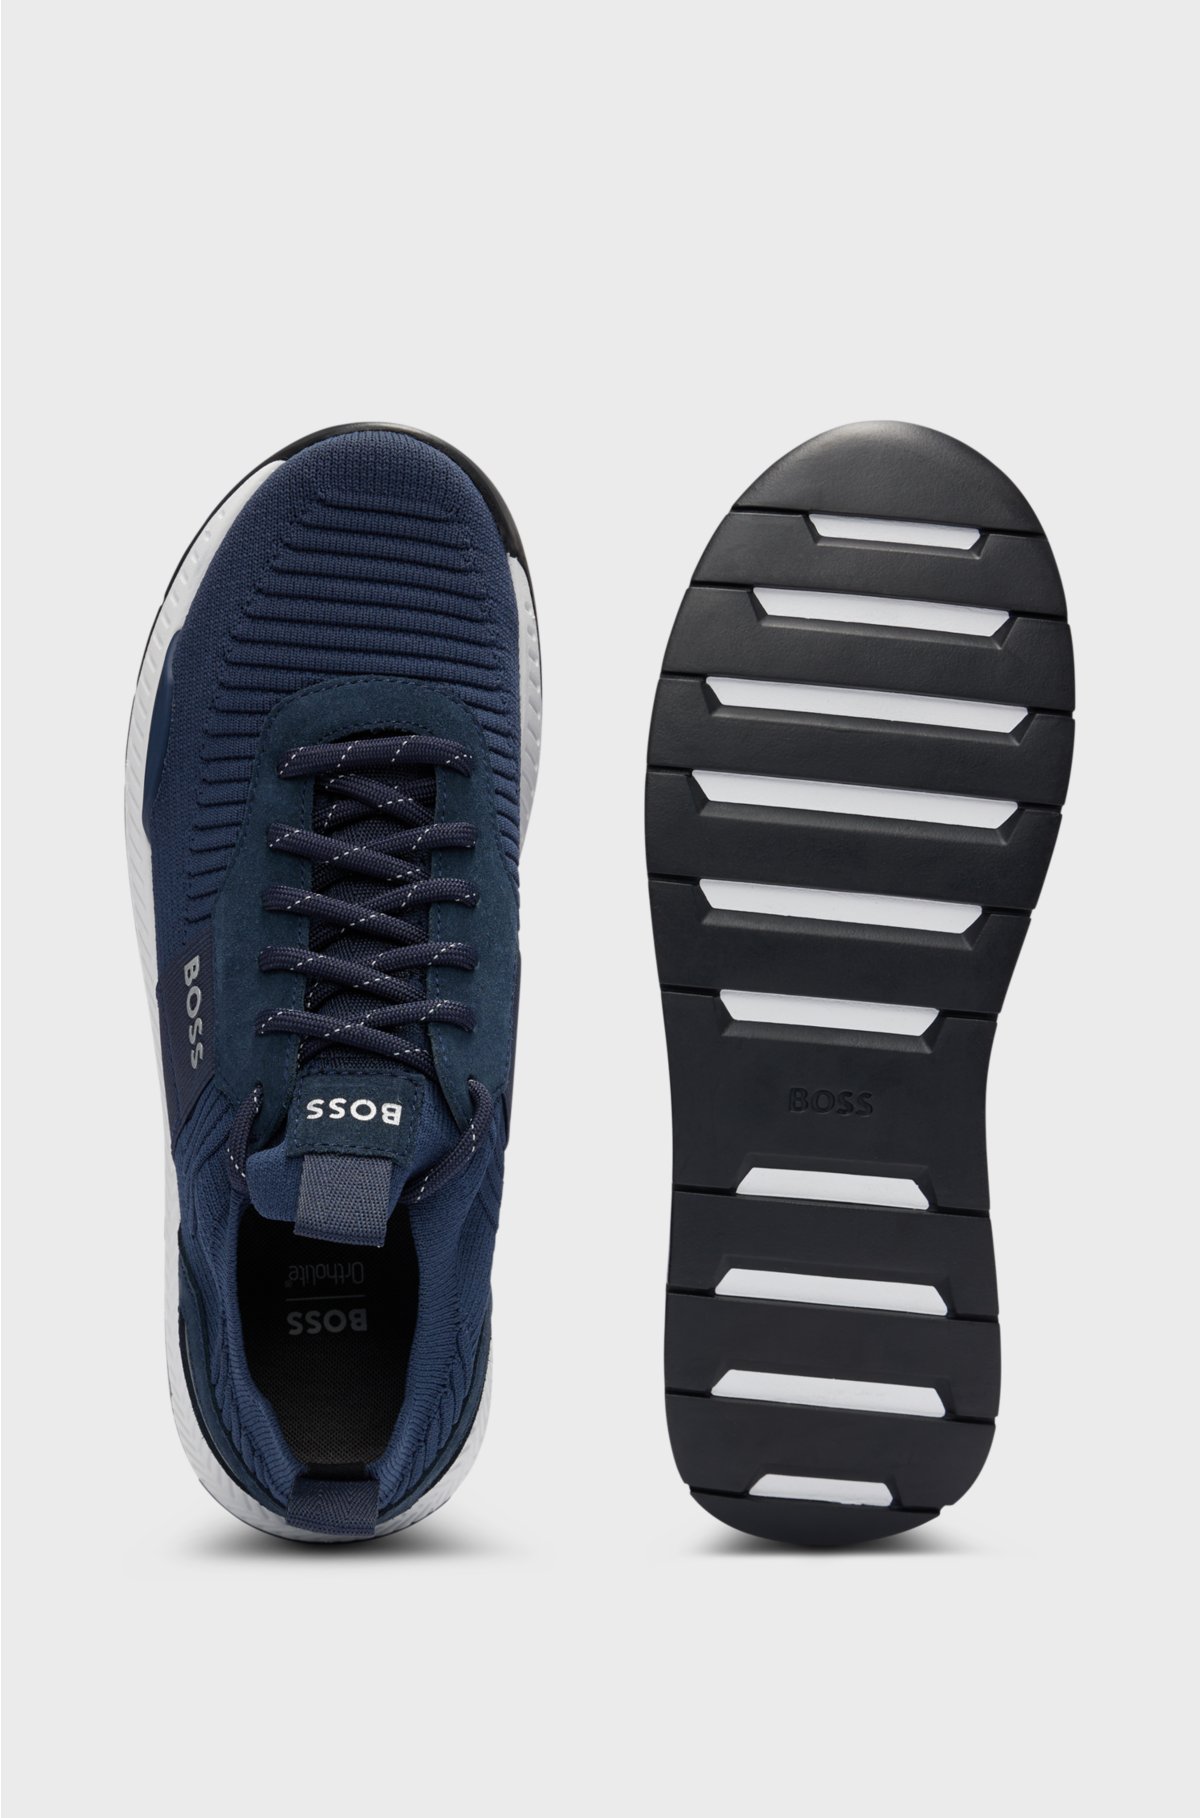 Knitted-upper trainers with branding and suede trims, Dark Blue